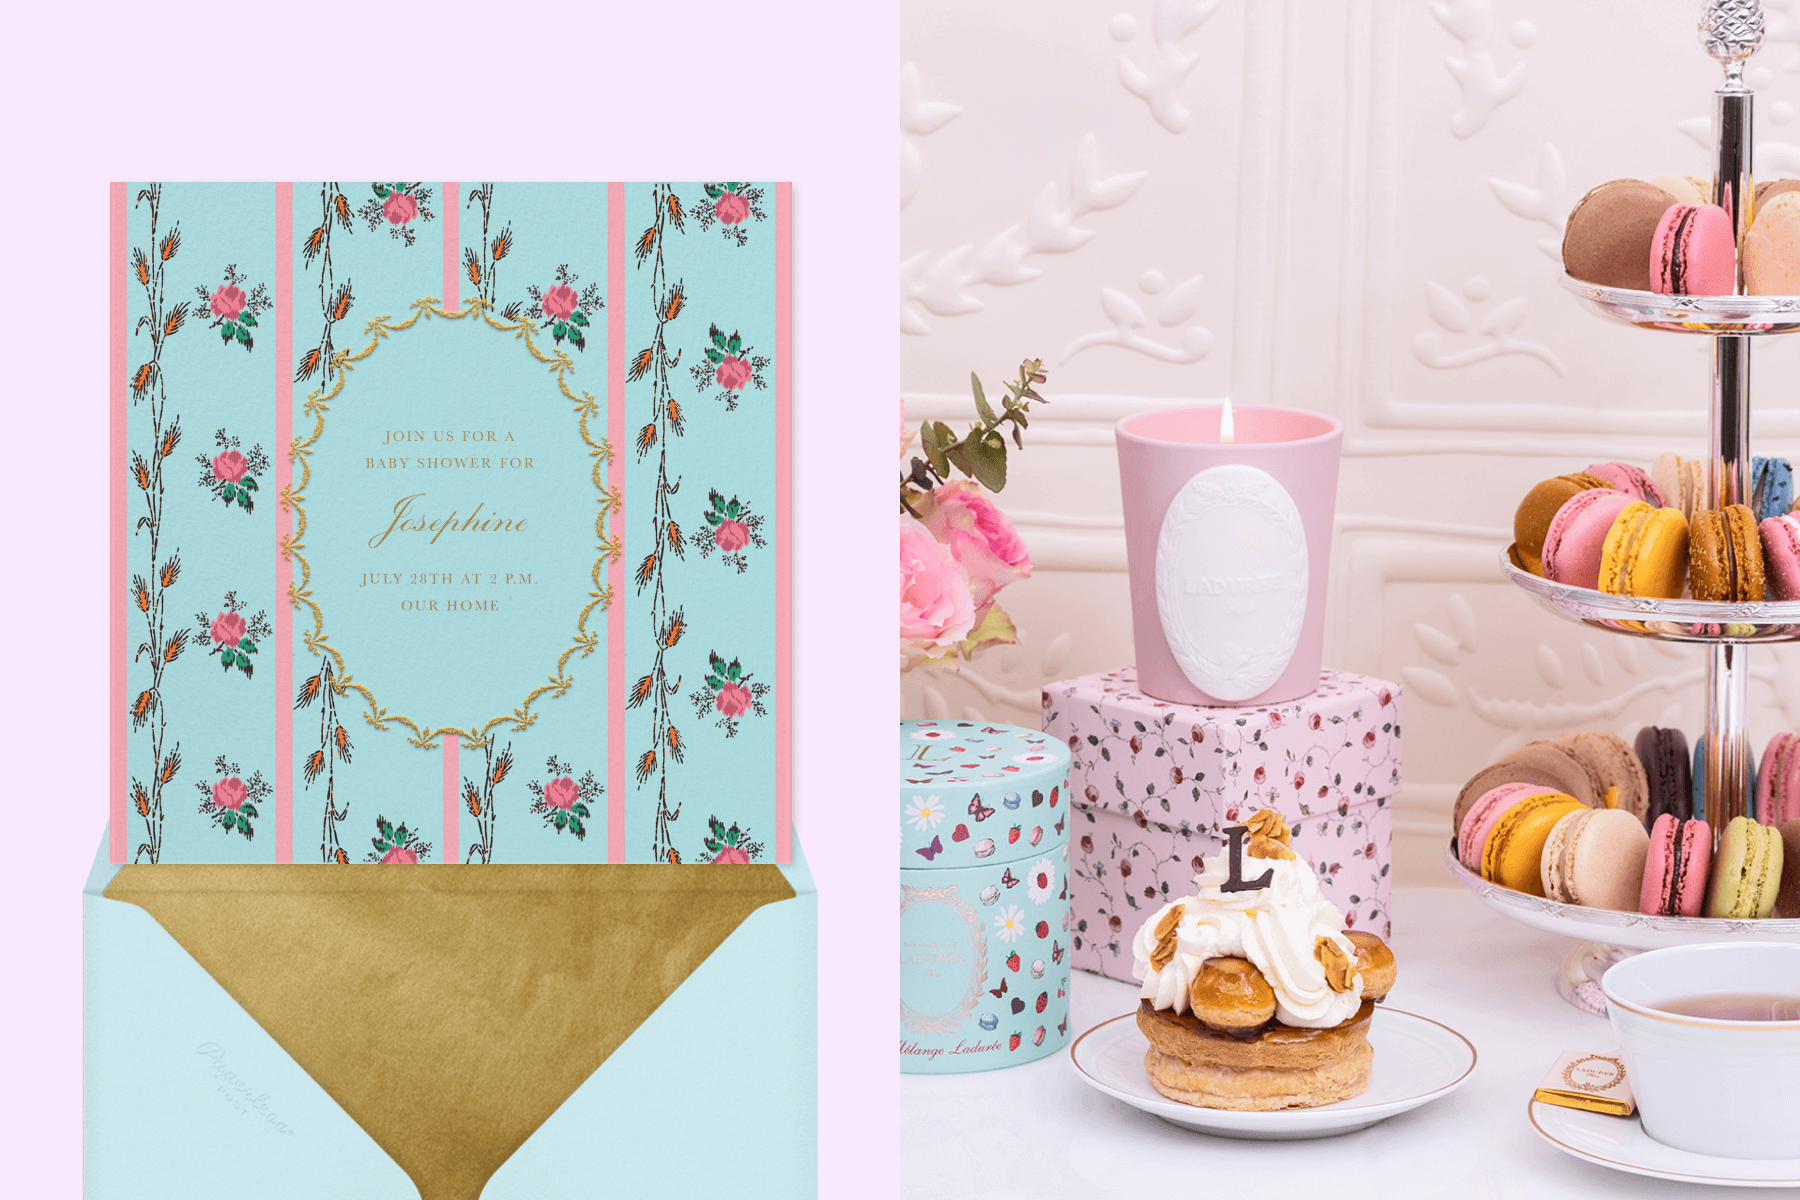 Left: A blue floral baby shower invitation; Right: A decorated table of sweets, tea, and candles in Ladurée packaging.